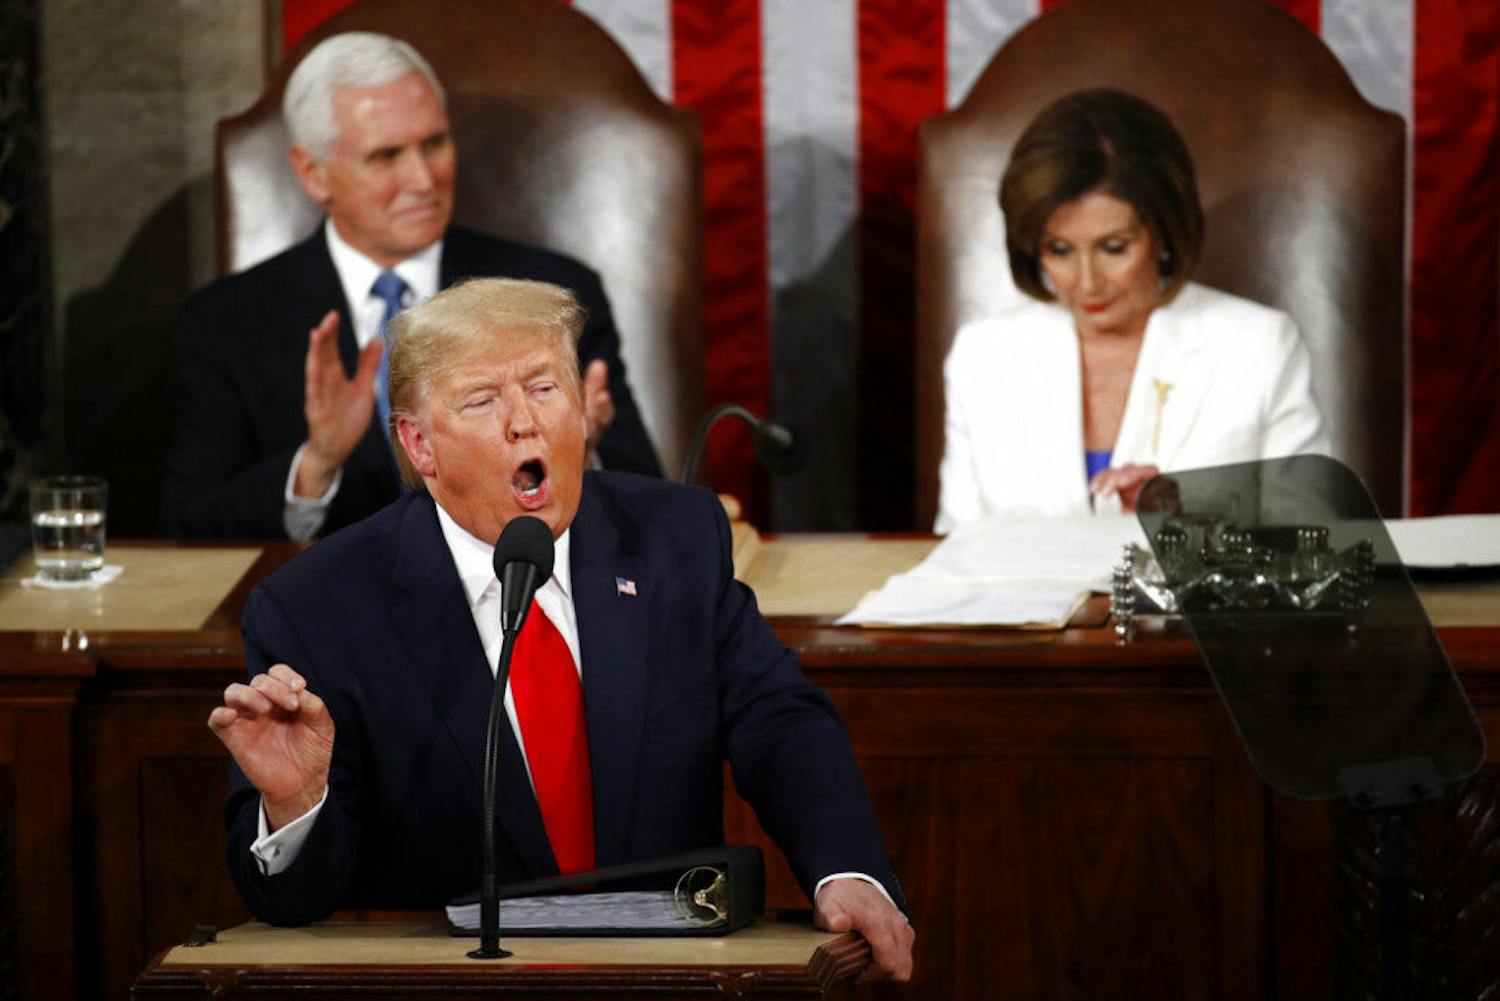 President Donald Trump delivers his State of the Union address to a joint session of Congress on Capitol Hill in Washington, Tuesday, Feb. 4, 2020, as Vice President Mike Pence ad House Speaker Nancy Pelosi of Calif., listen. (AP Photo/Patrick Semansky)